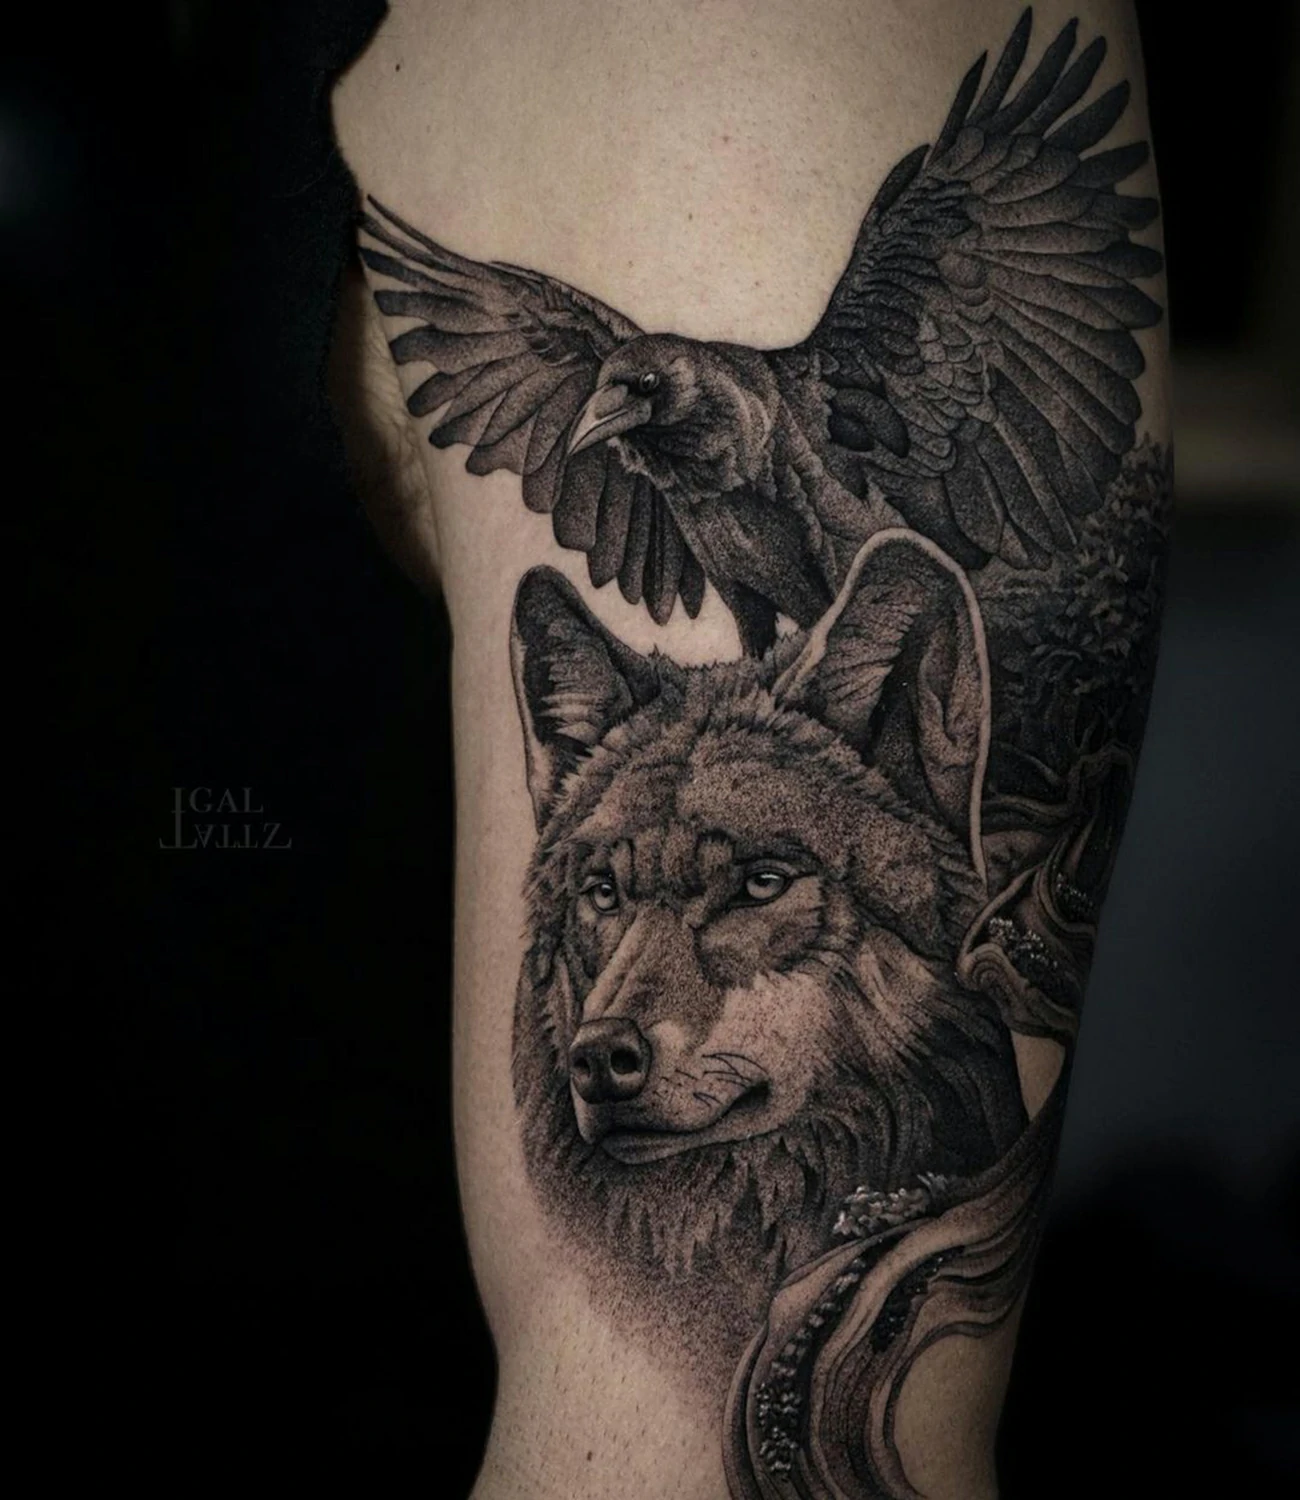 Wolf and raven tattoo: A tattoo featuring both a wolf and a raven, symbolizing duality.